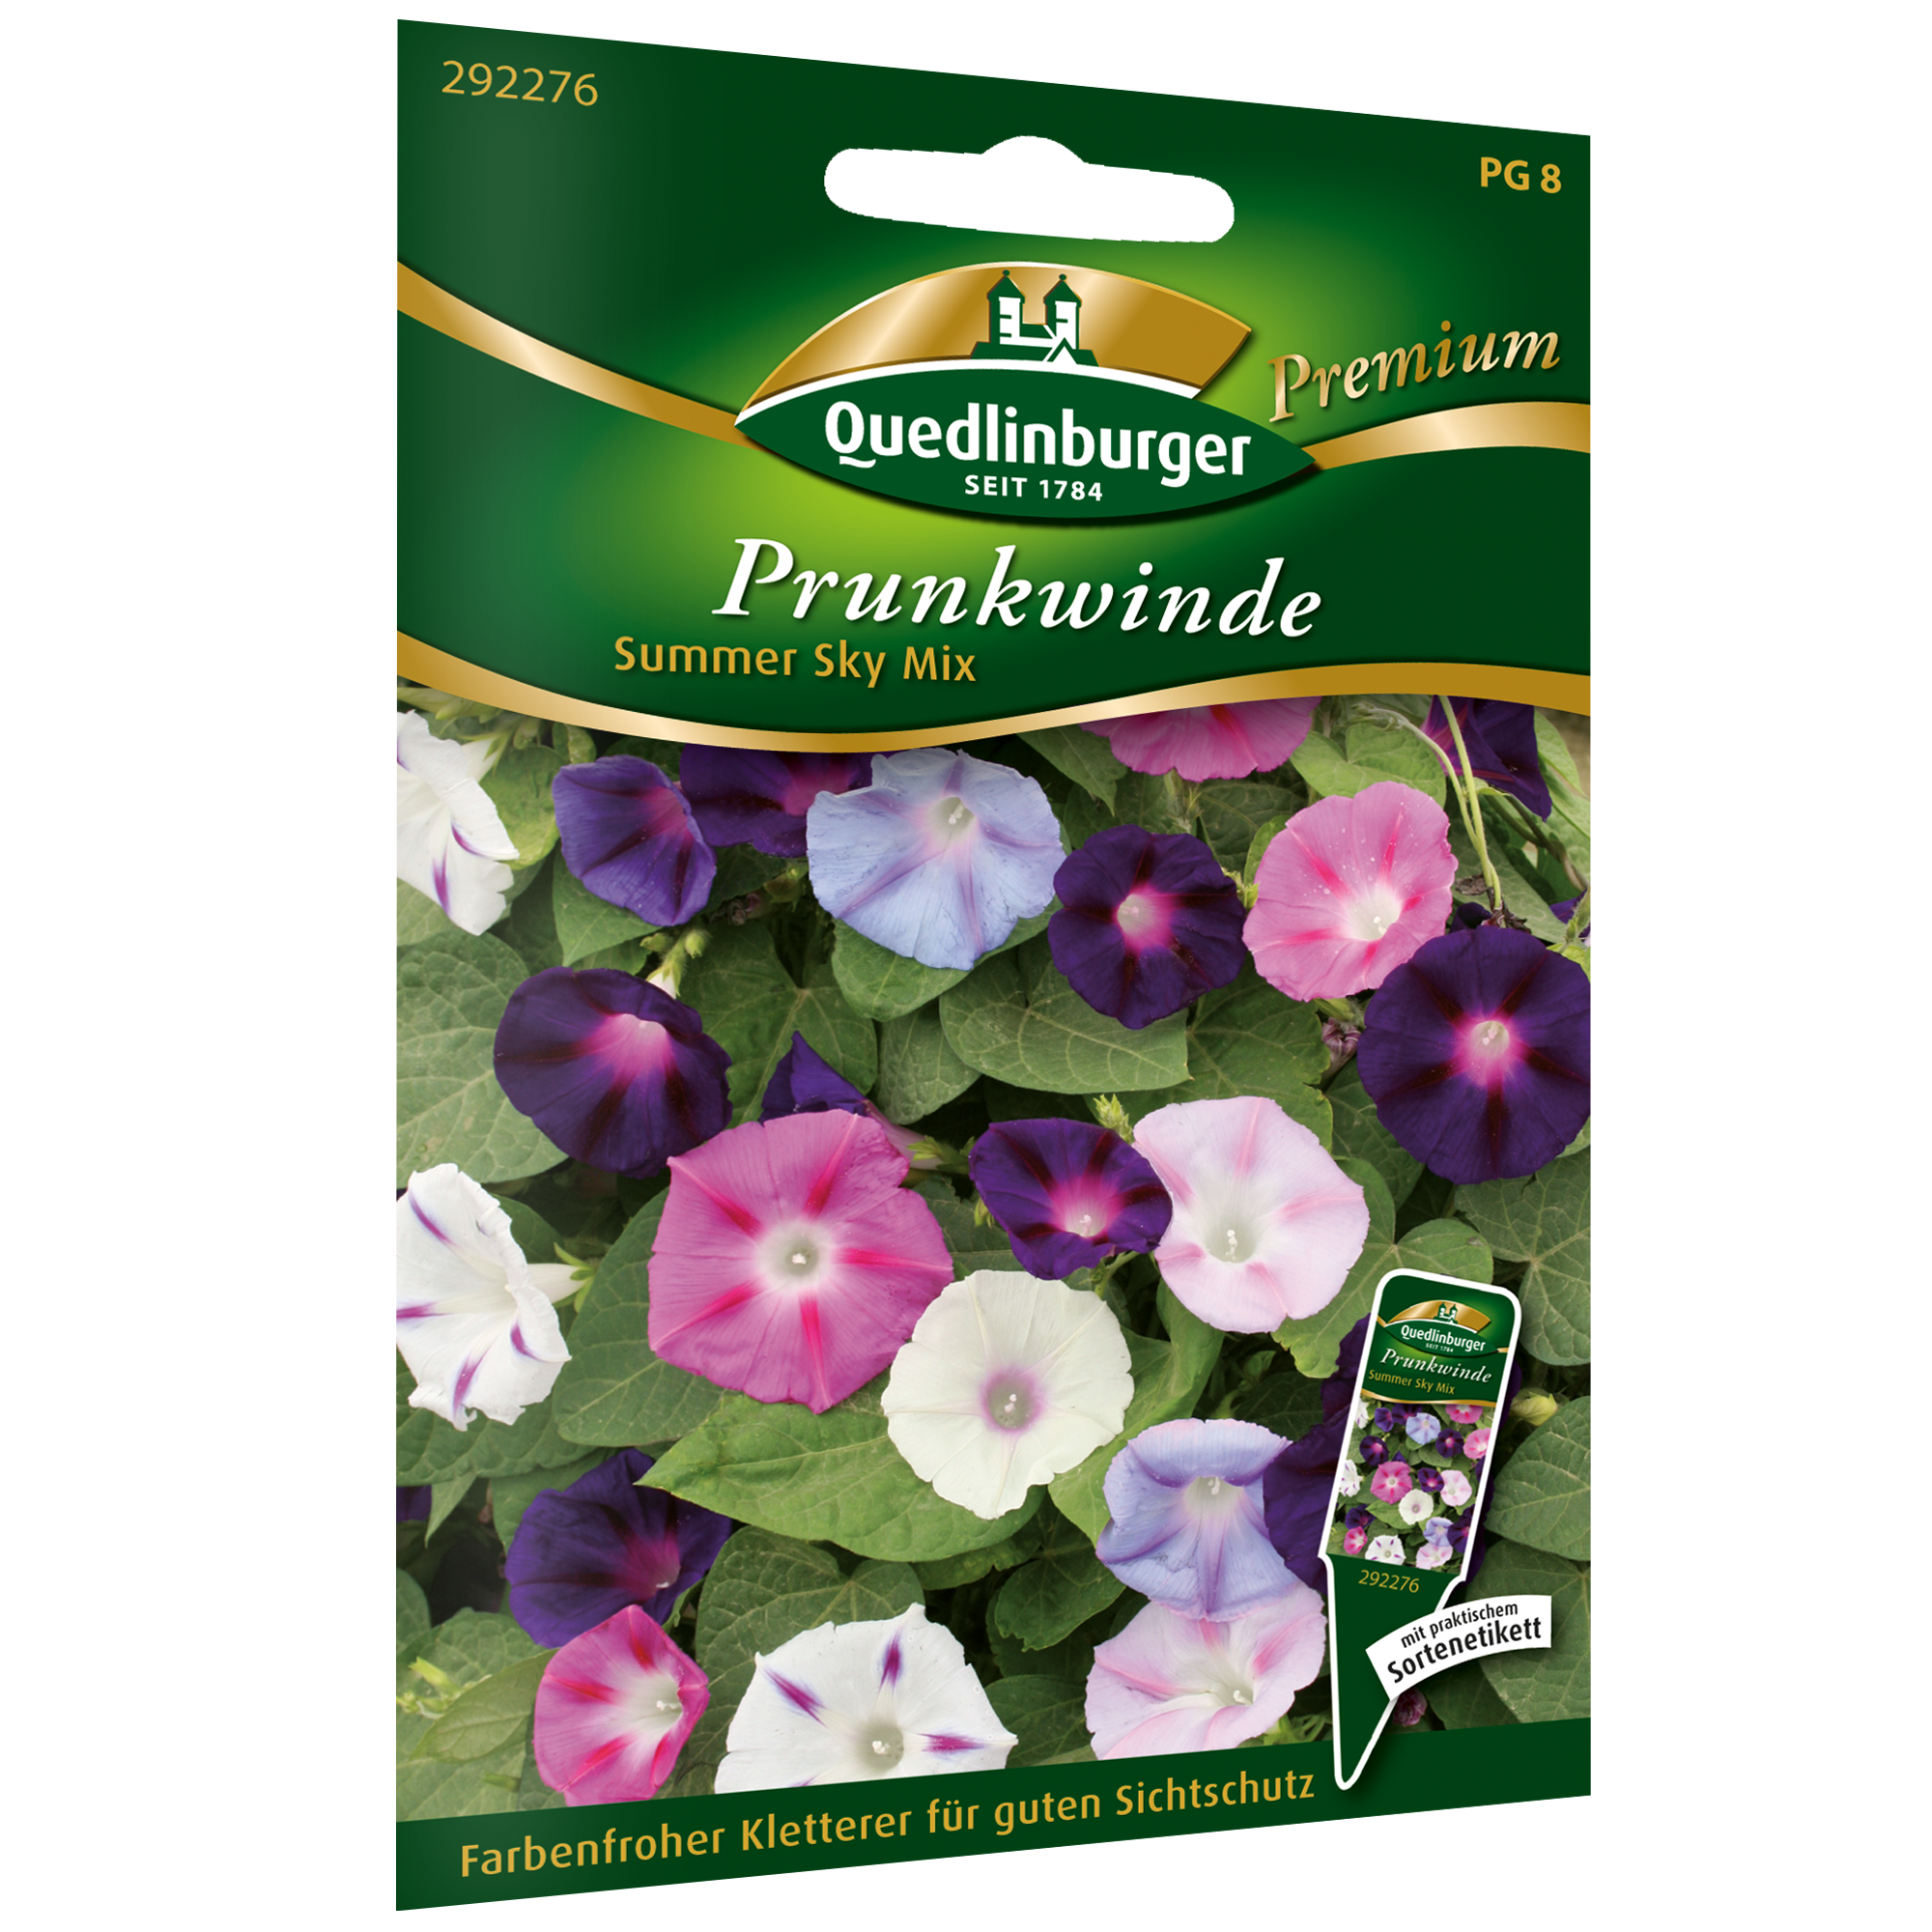 Prunkwinde 'Summer Sky Mix' + product picture